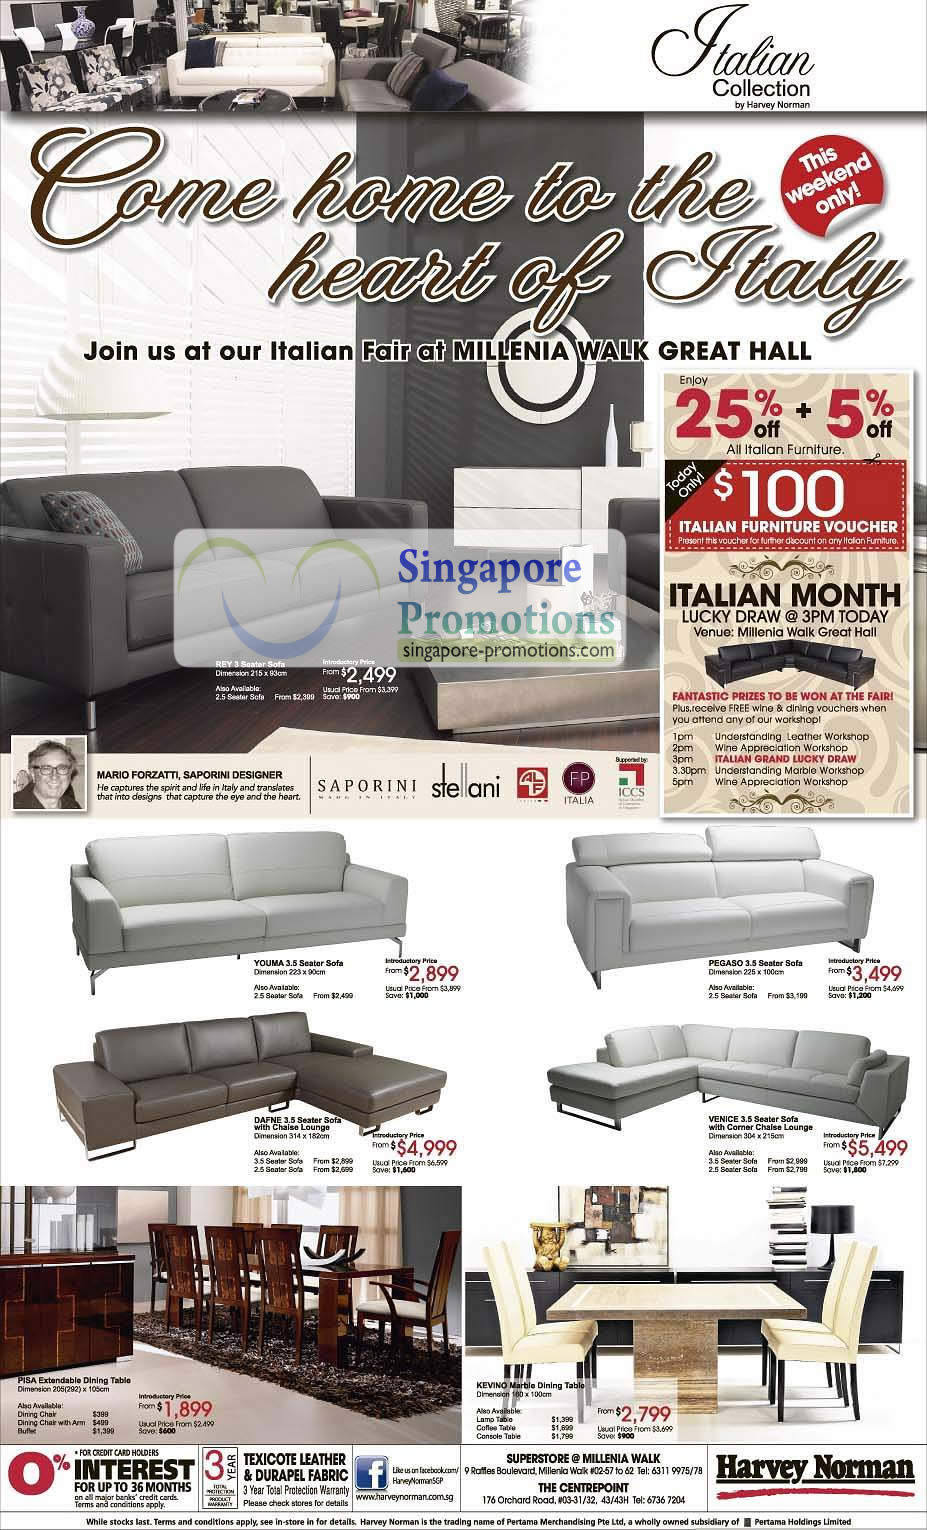 Featured image for Harvey Norman Digital Cameras, Furniture, Notebooks & Appliances Offers 29 Sep - 5 Oct 2012